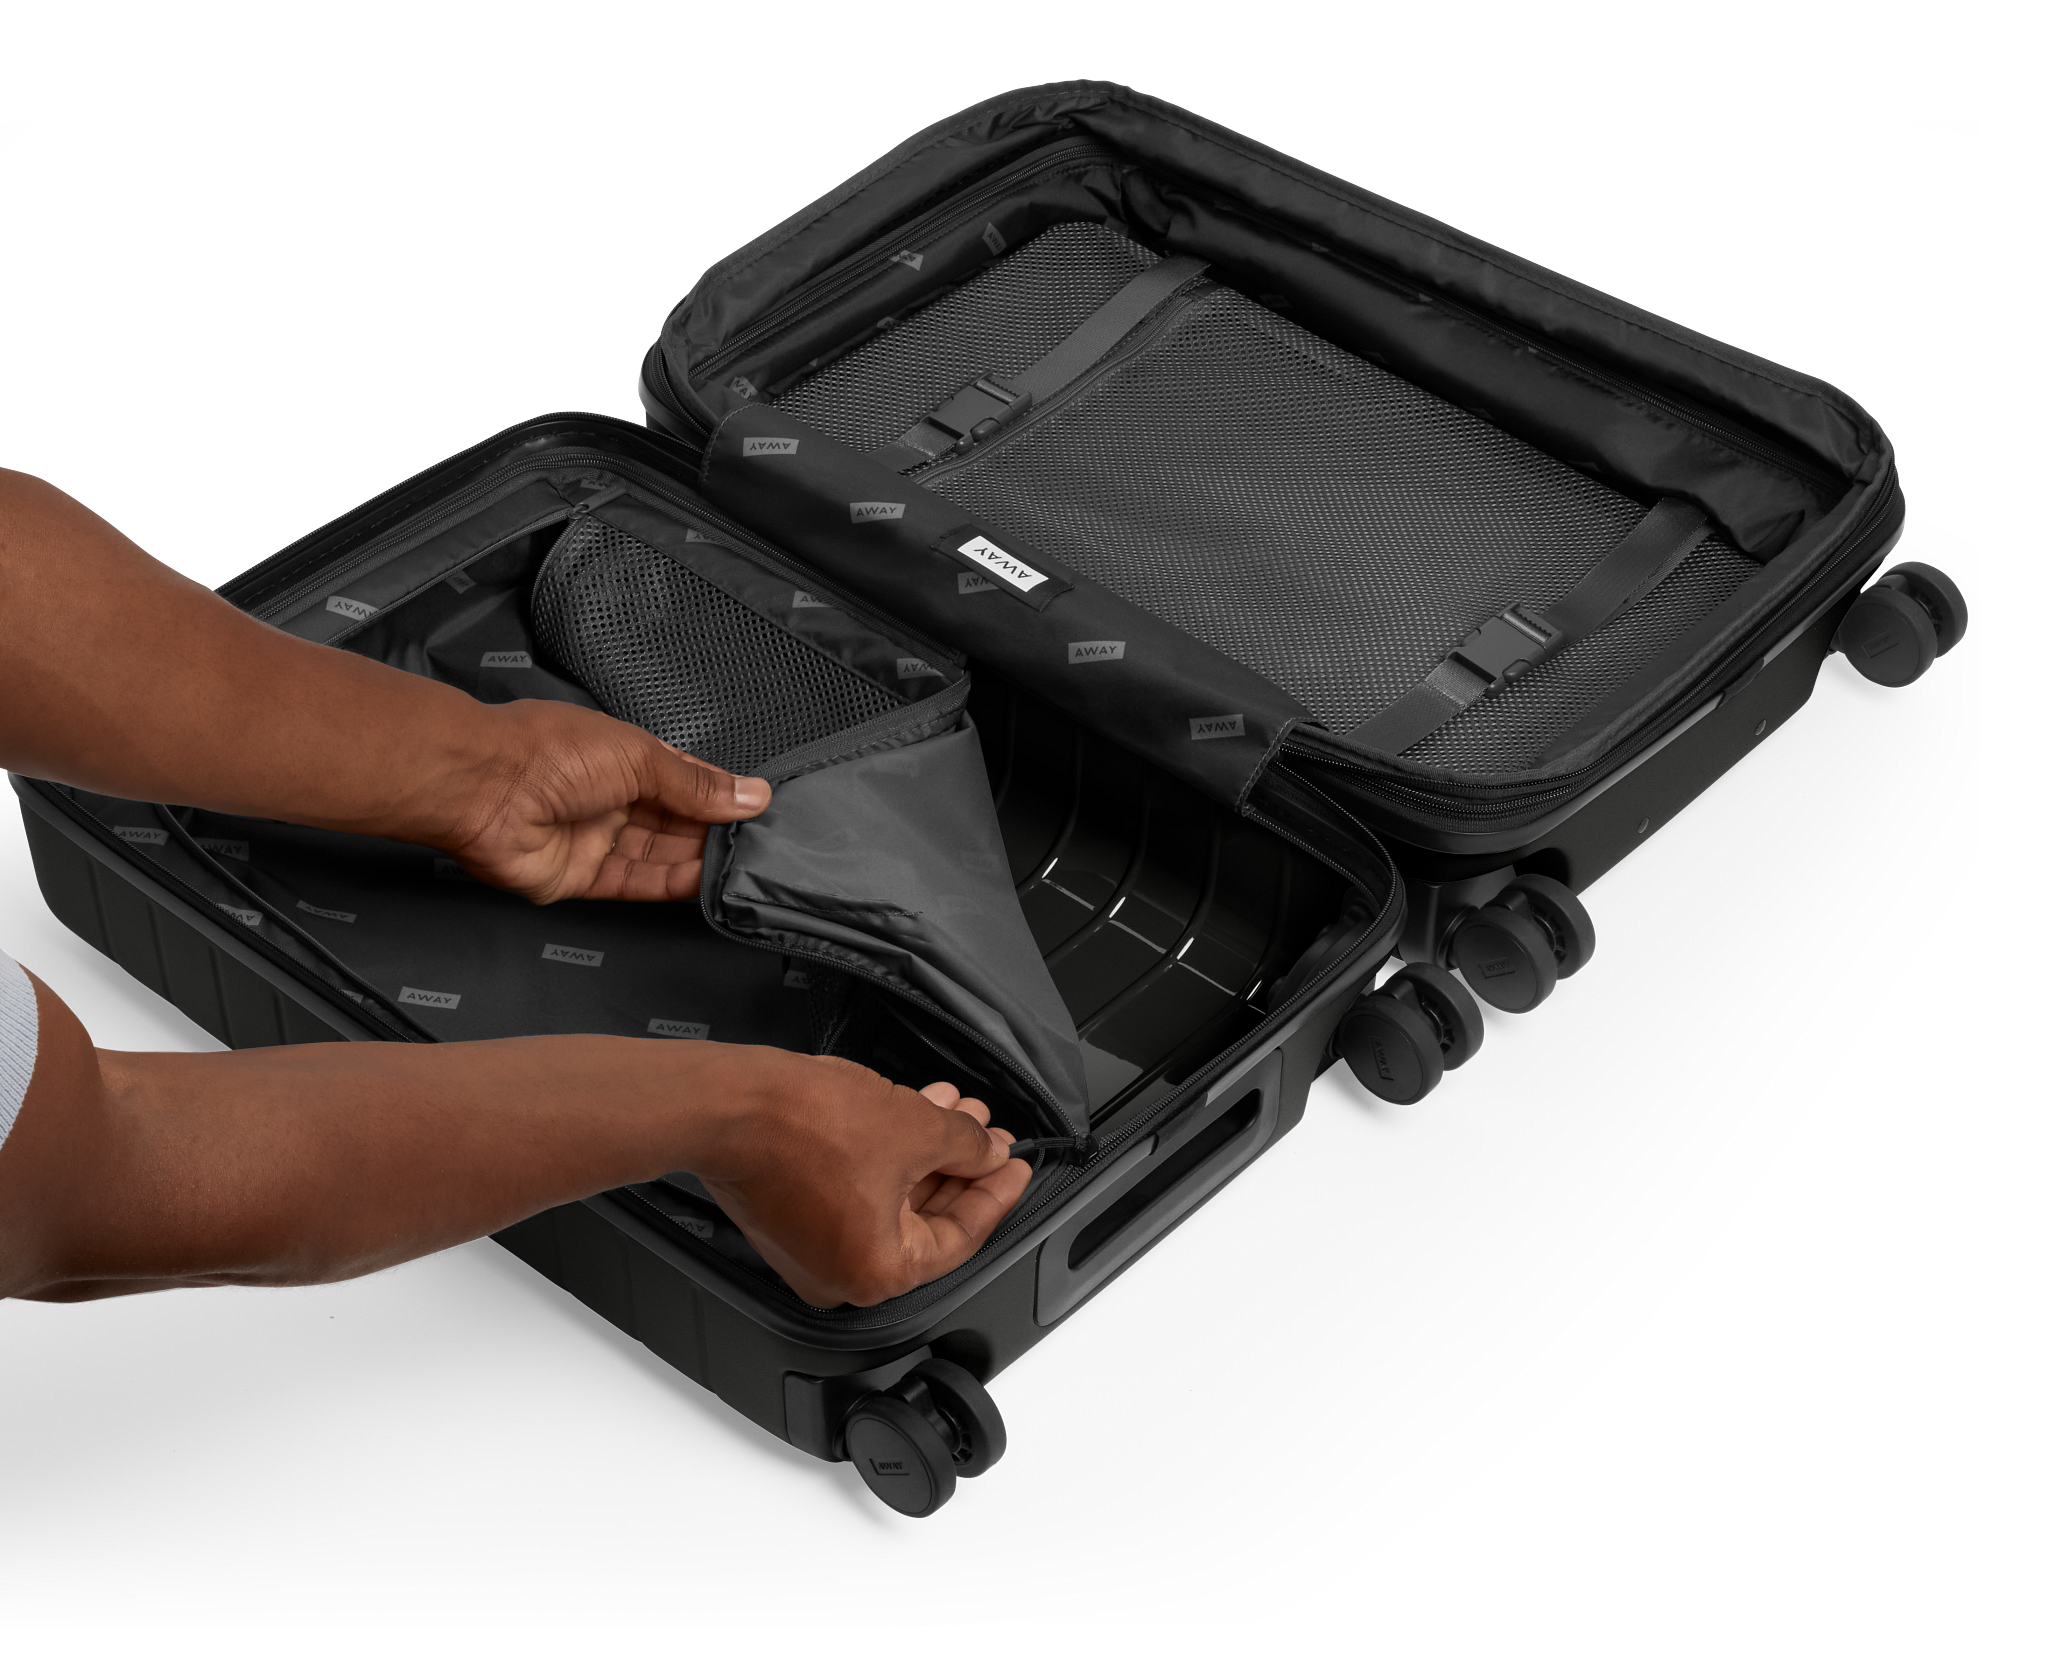 A Must-Have Flex Suitcase From Away